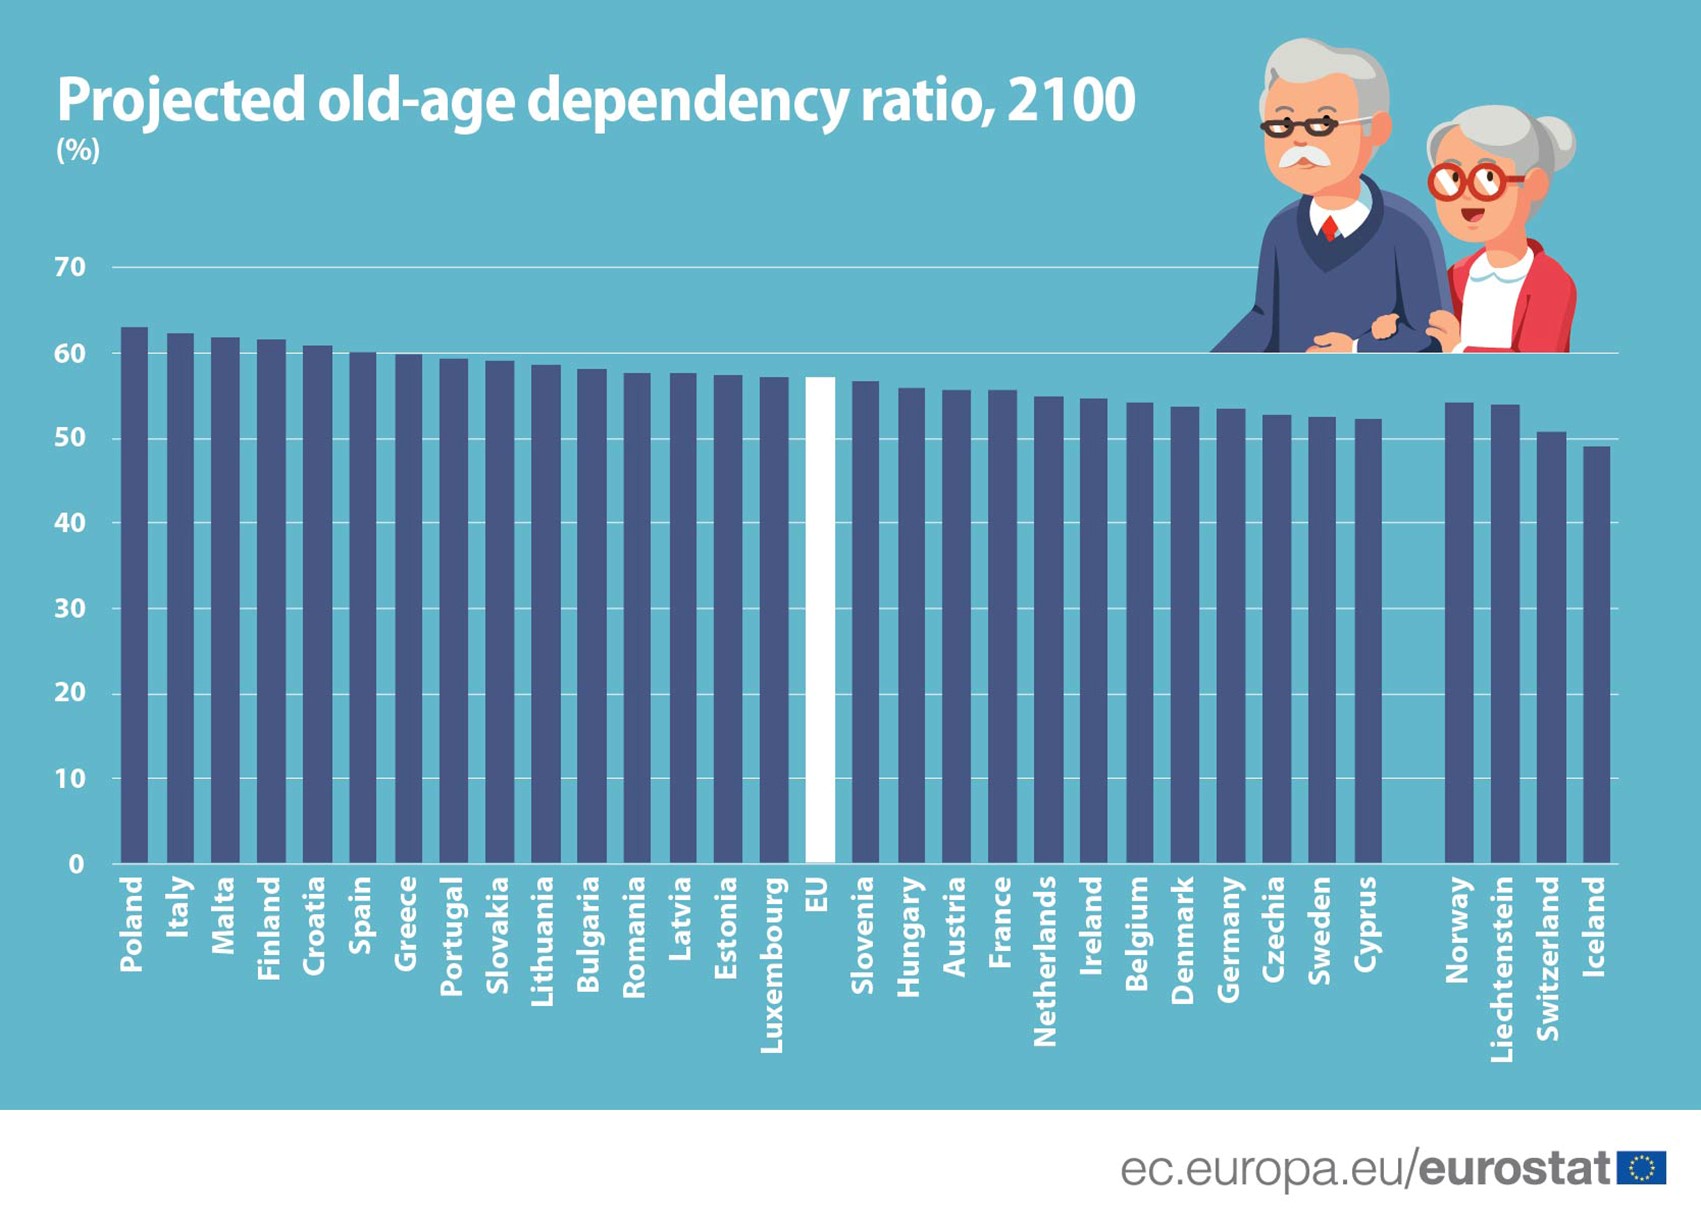 Projected old age dependency ratio 2100